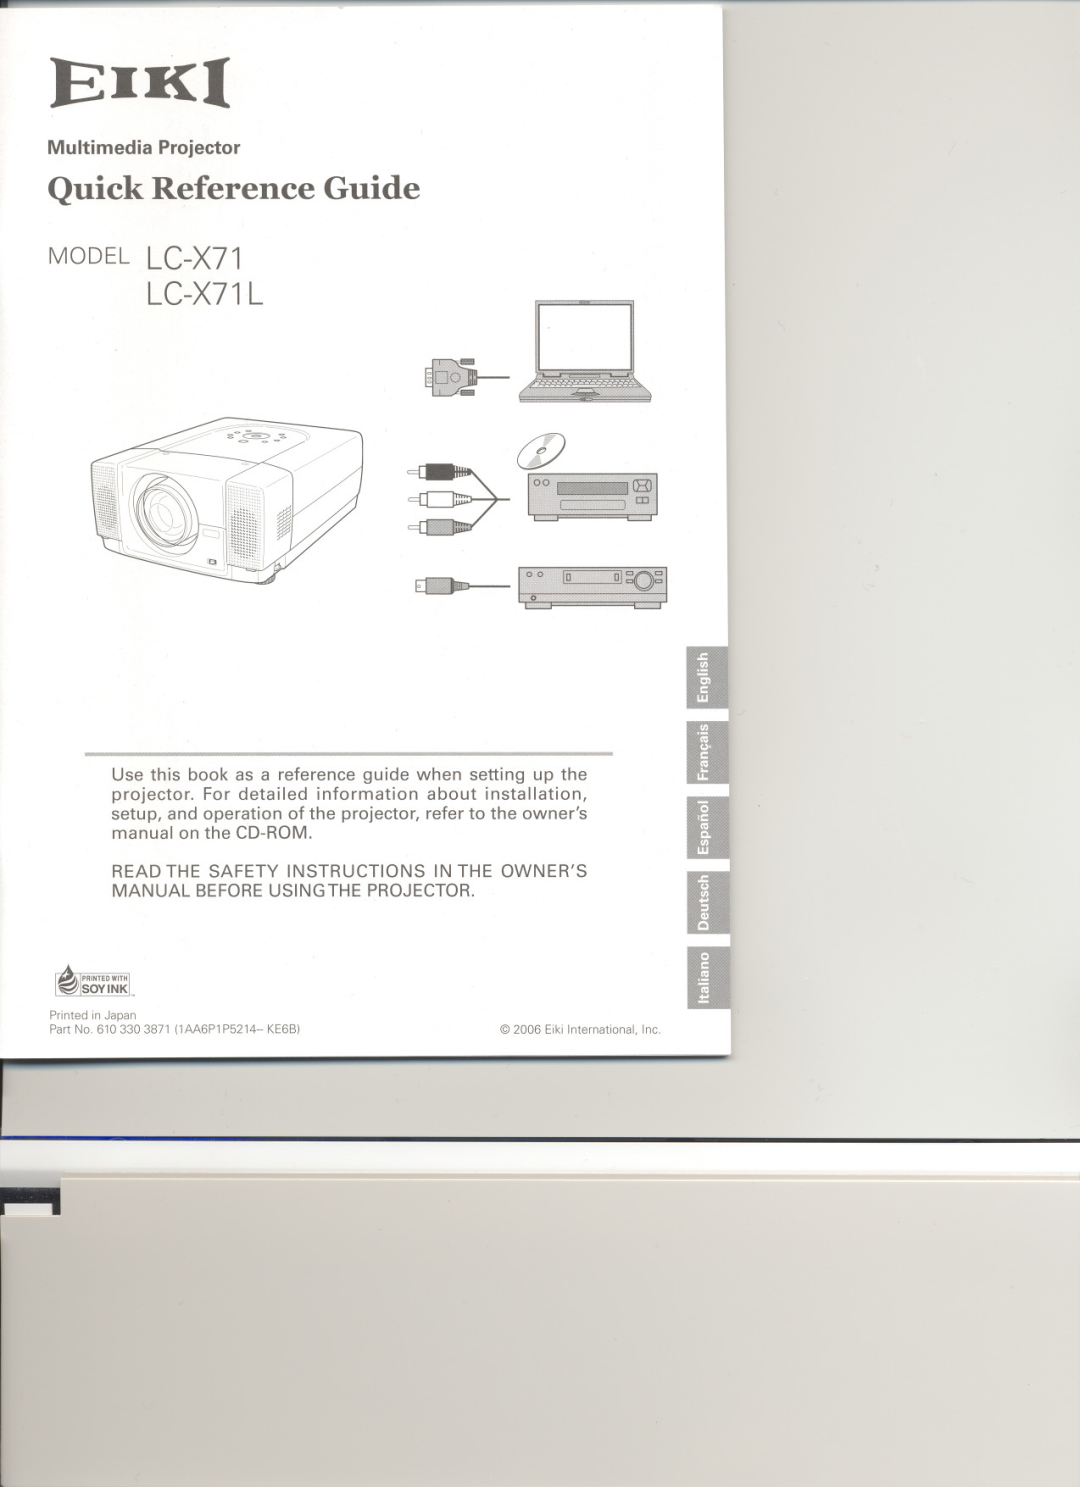 Eiki LC-X7L owner manual Read The Safety Instructions In The Owners, Manual Beforeusingthe Projector, LC-X71L, Printed 